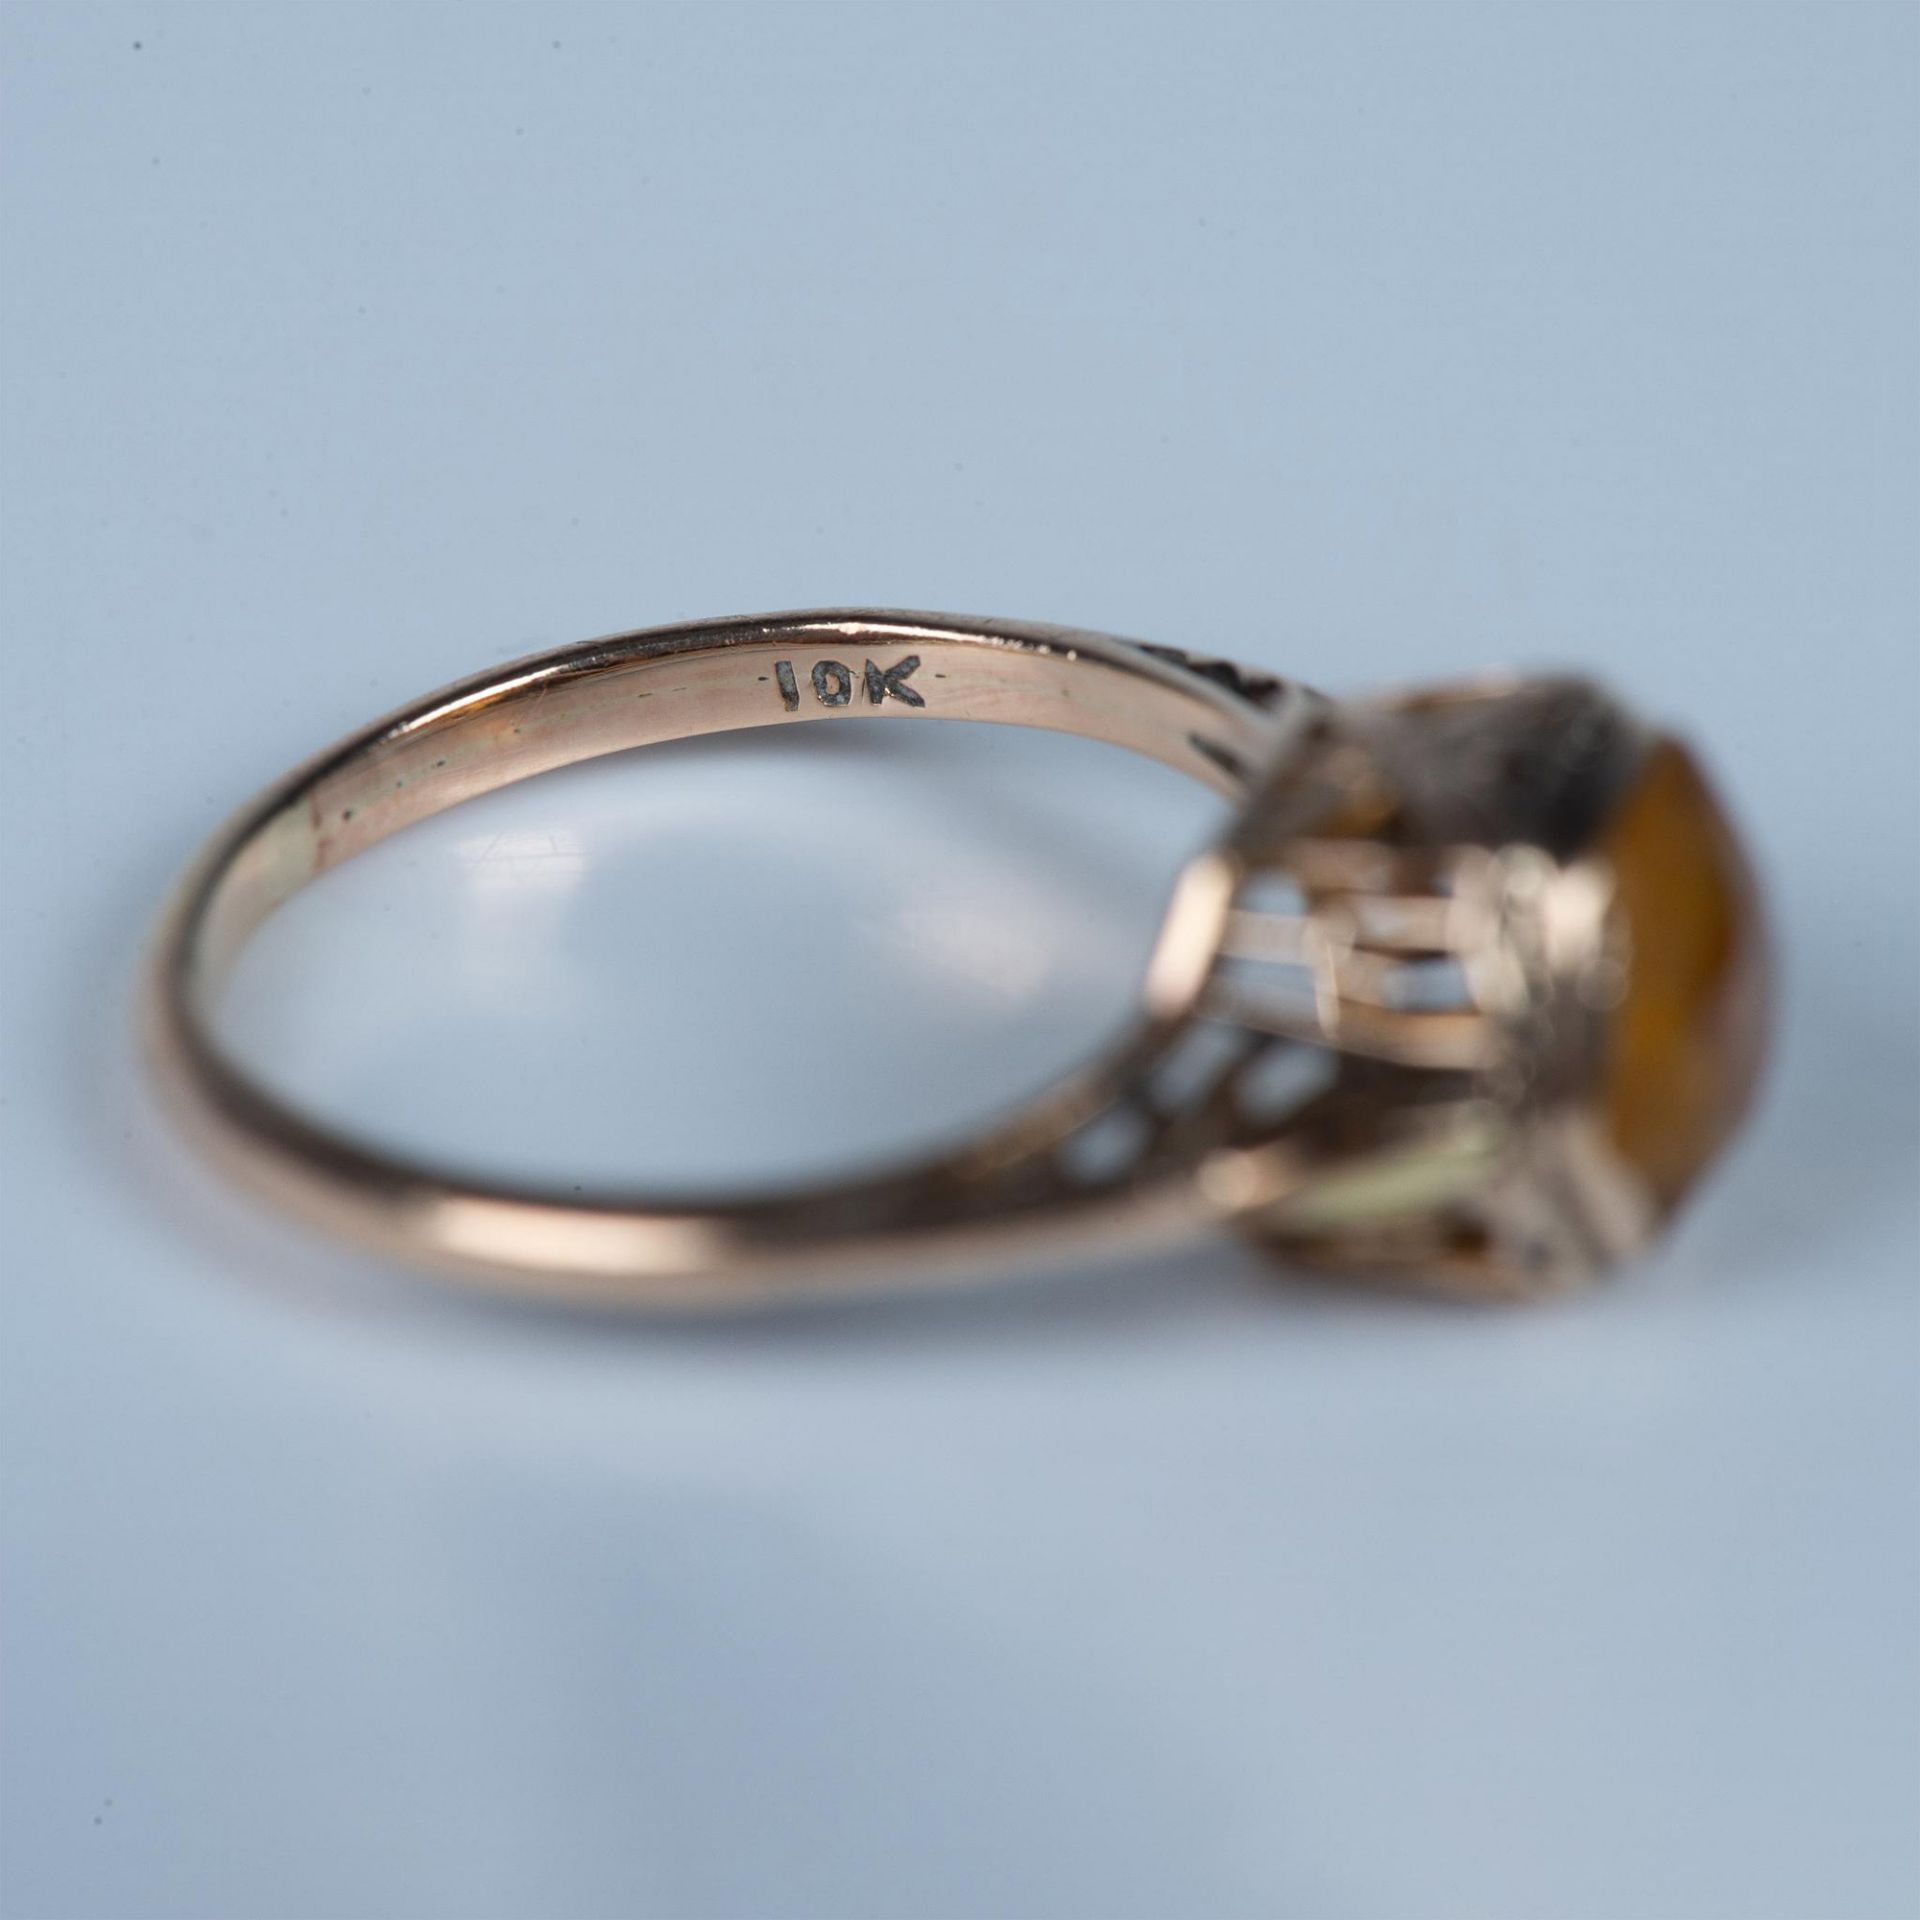 Vintage 10K Yellow Gold & Citrine Ring - Image 3 of 5